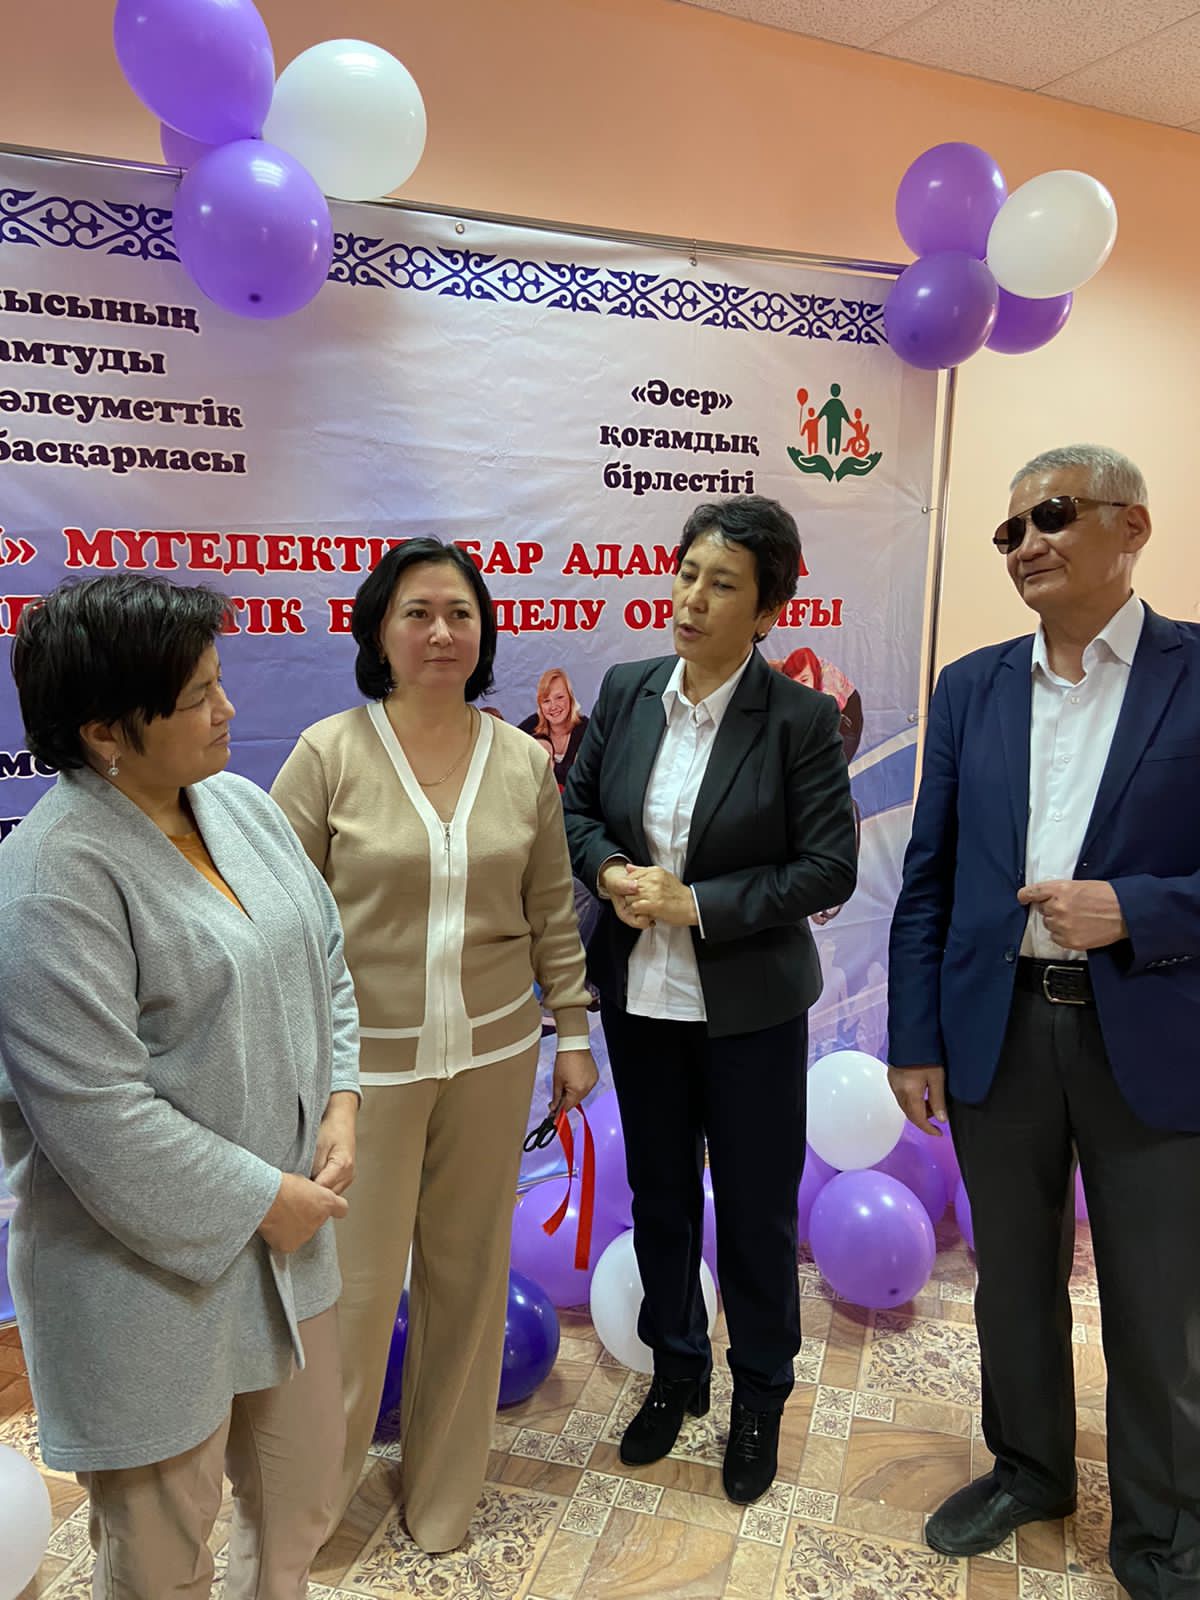 The opening of the Social Support Center "Ten qogam" took place